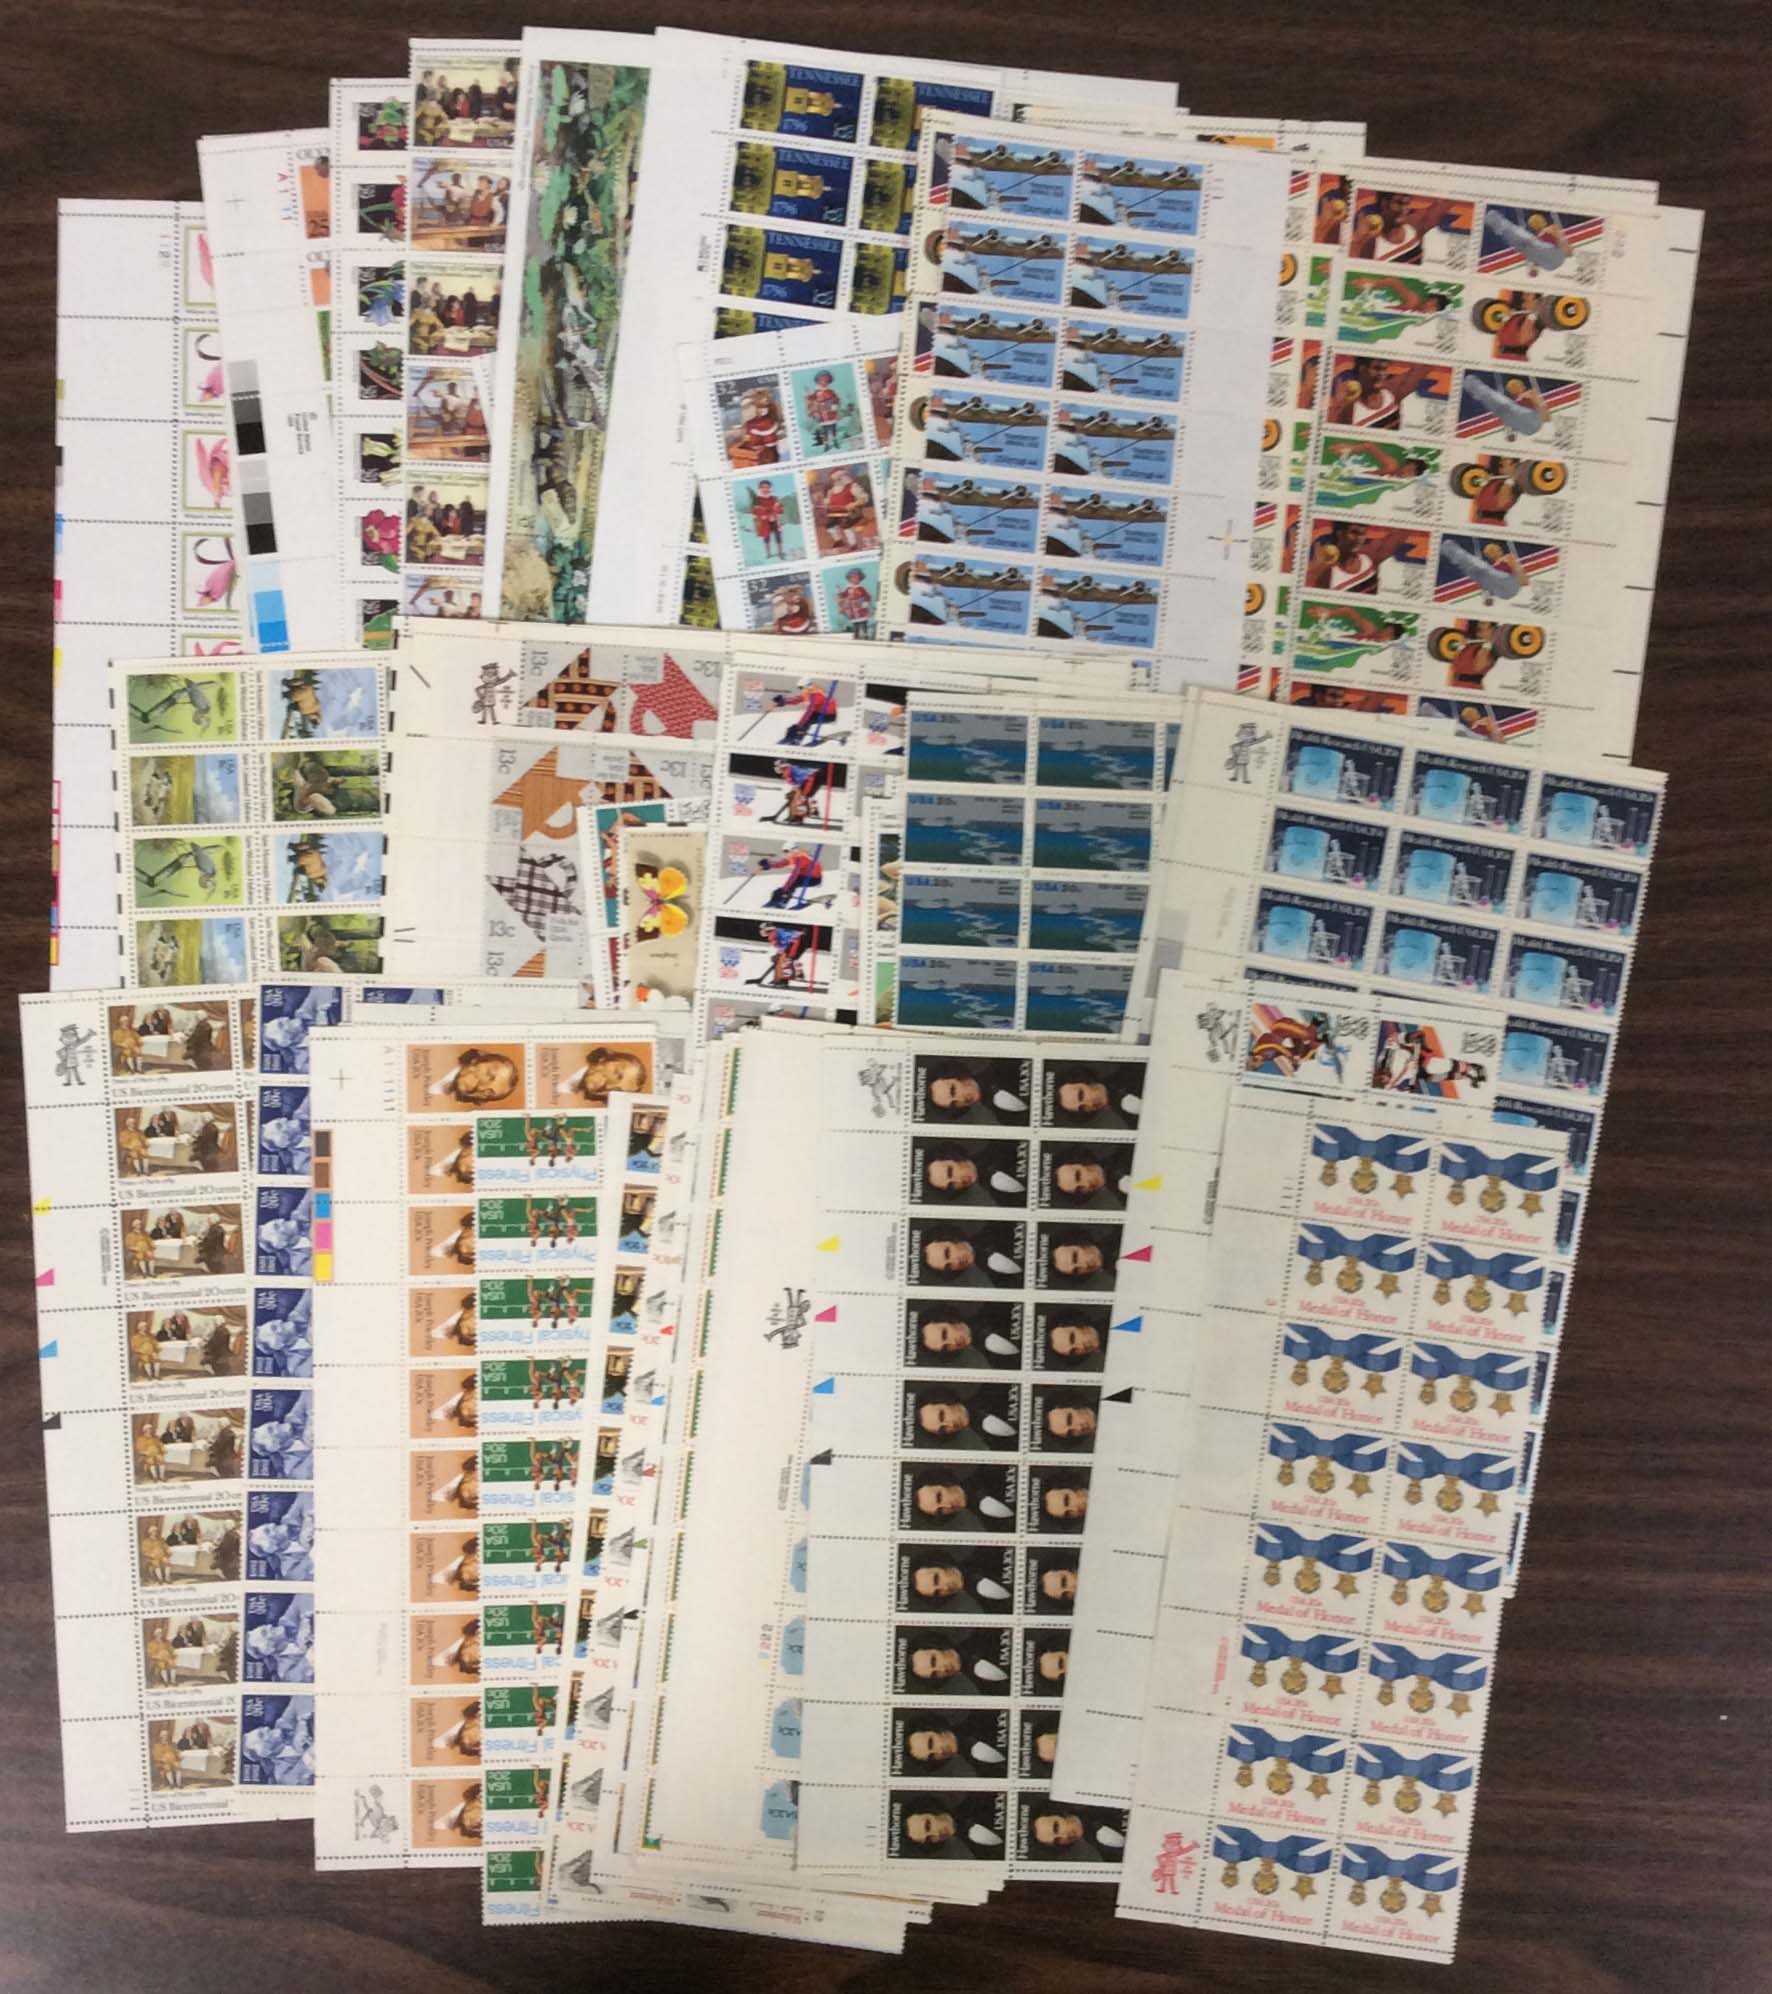 Under First-Class Stamps, Mixed Lot, New Condition ($585.71 Face Value)